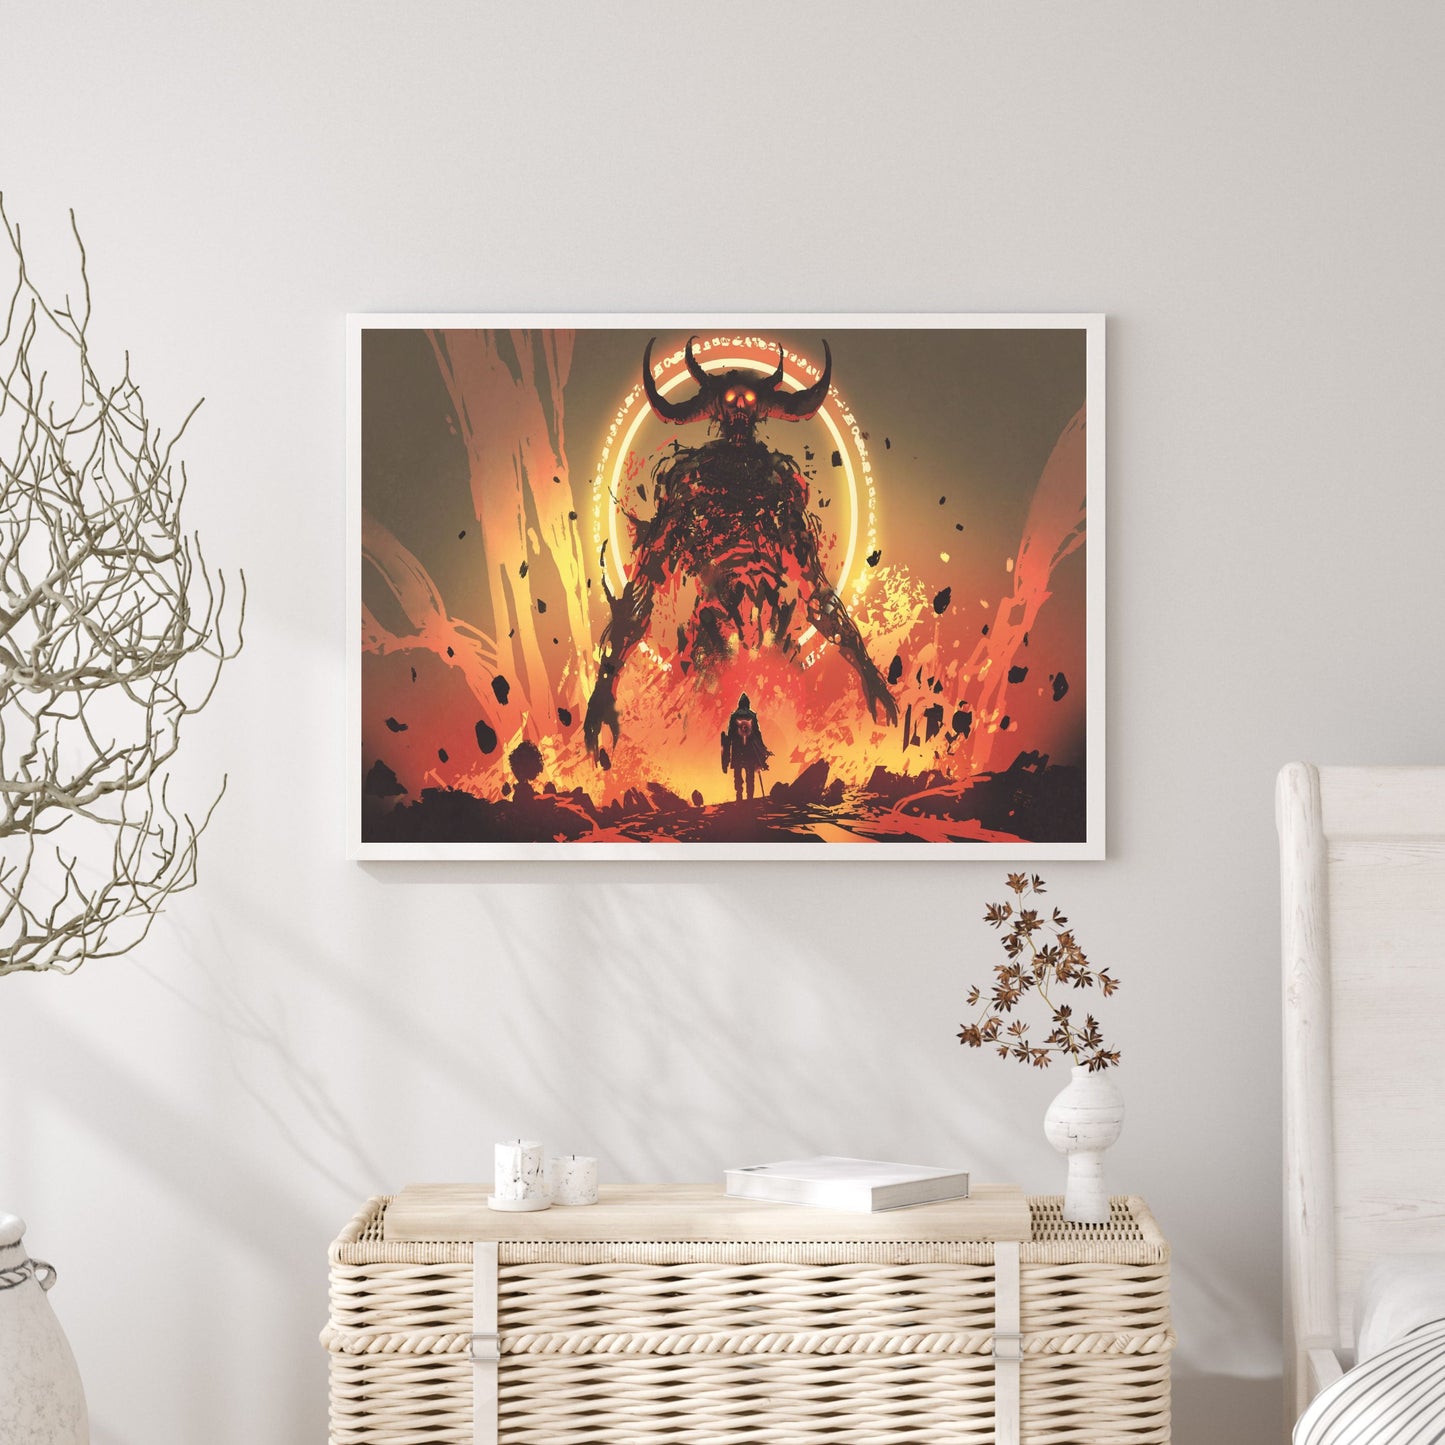 Knight with a sword facing the lava demon in hell